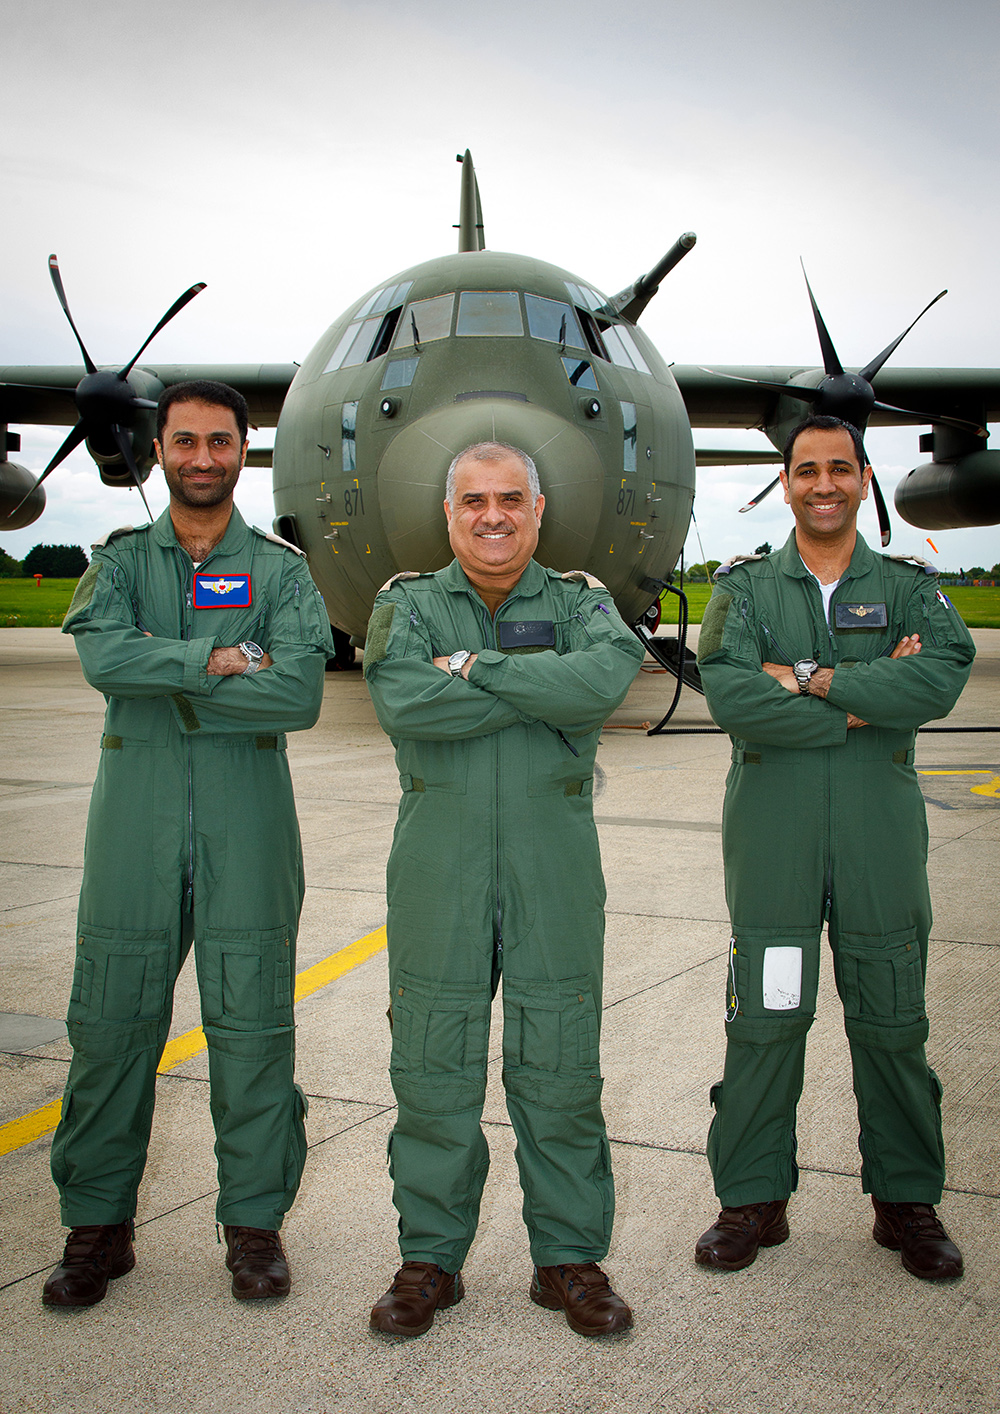 The Bahraini Pilots and Loadmaster pictured in front of the C-130J Hercules